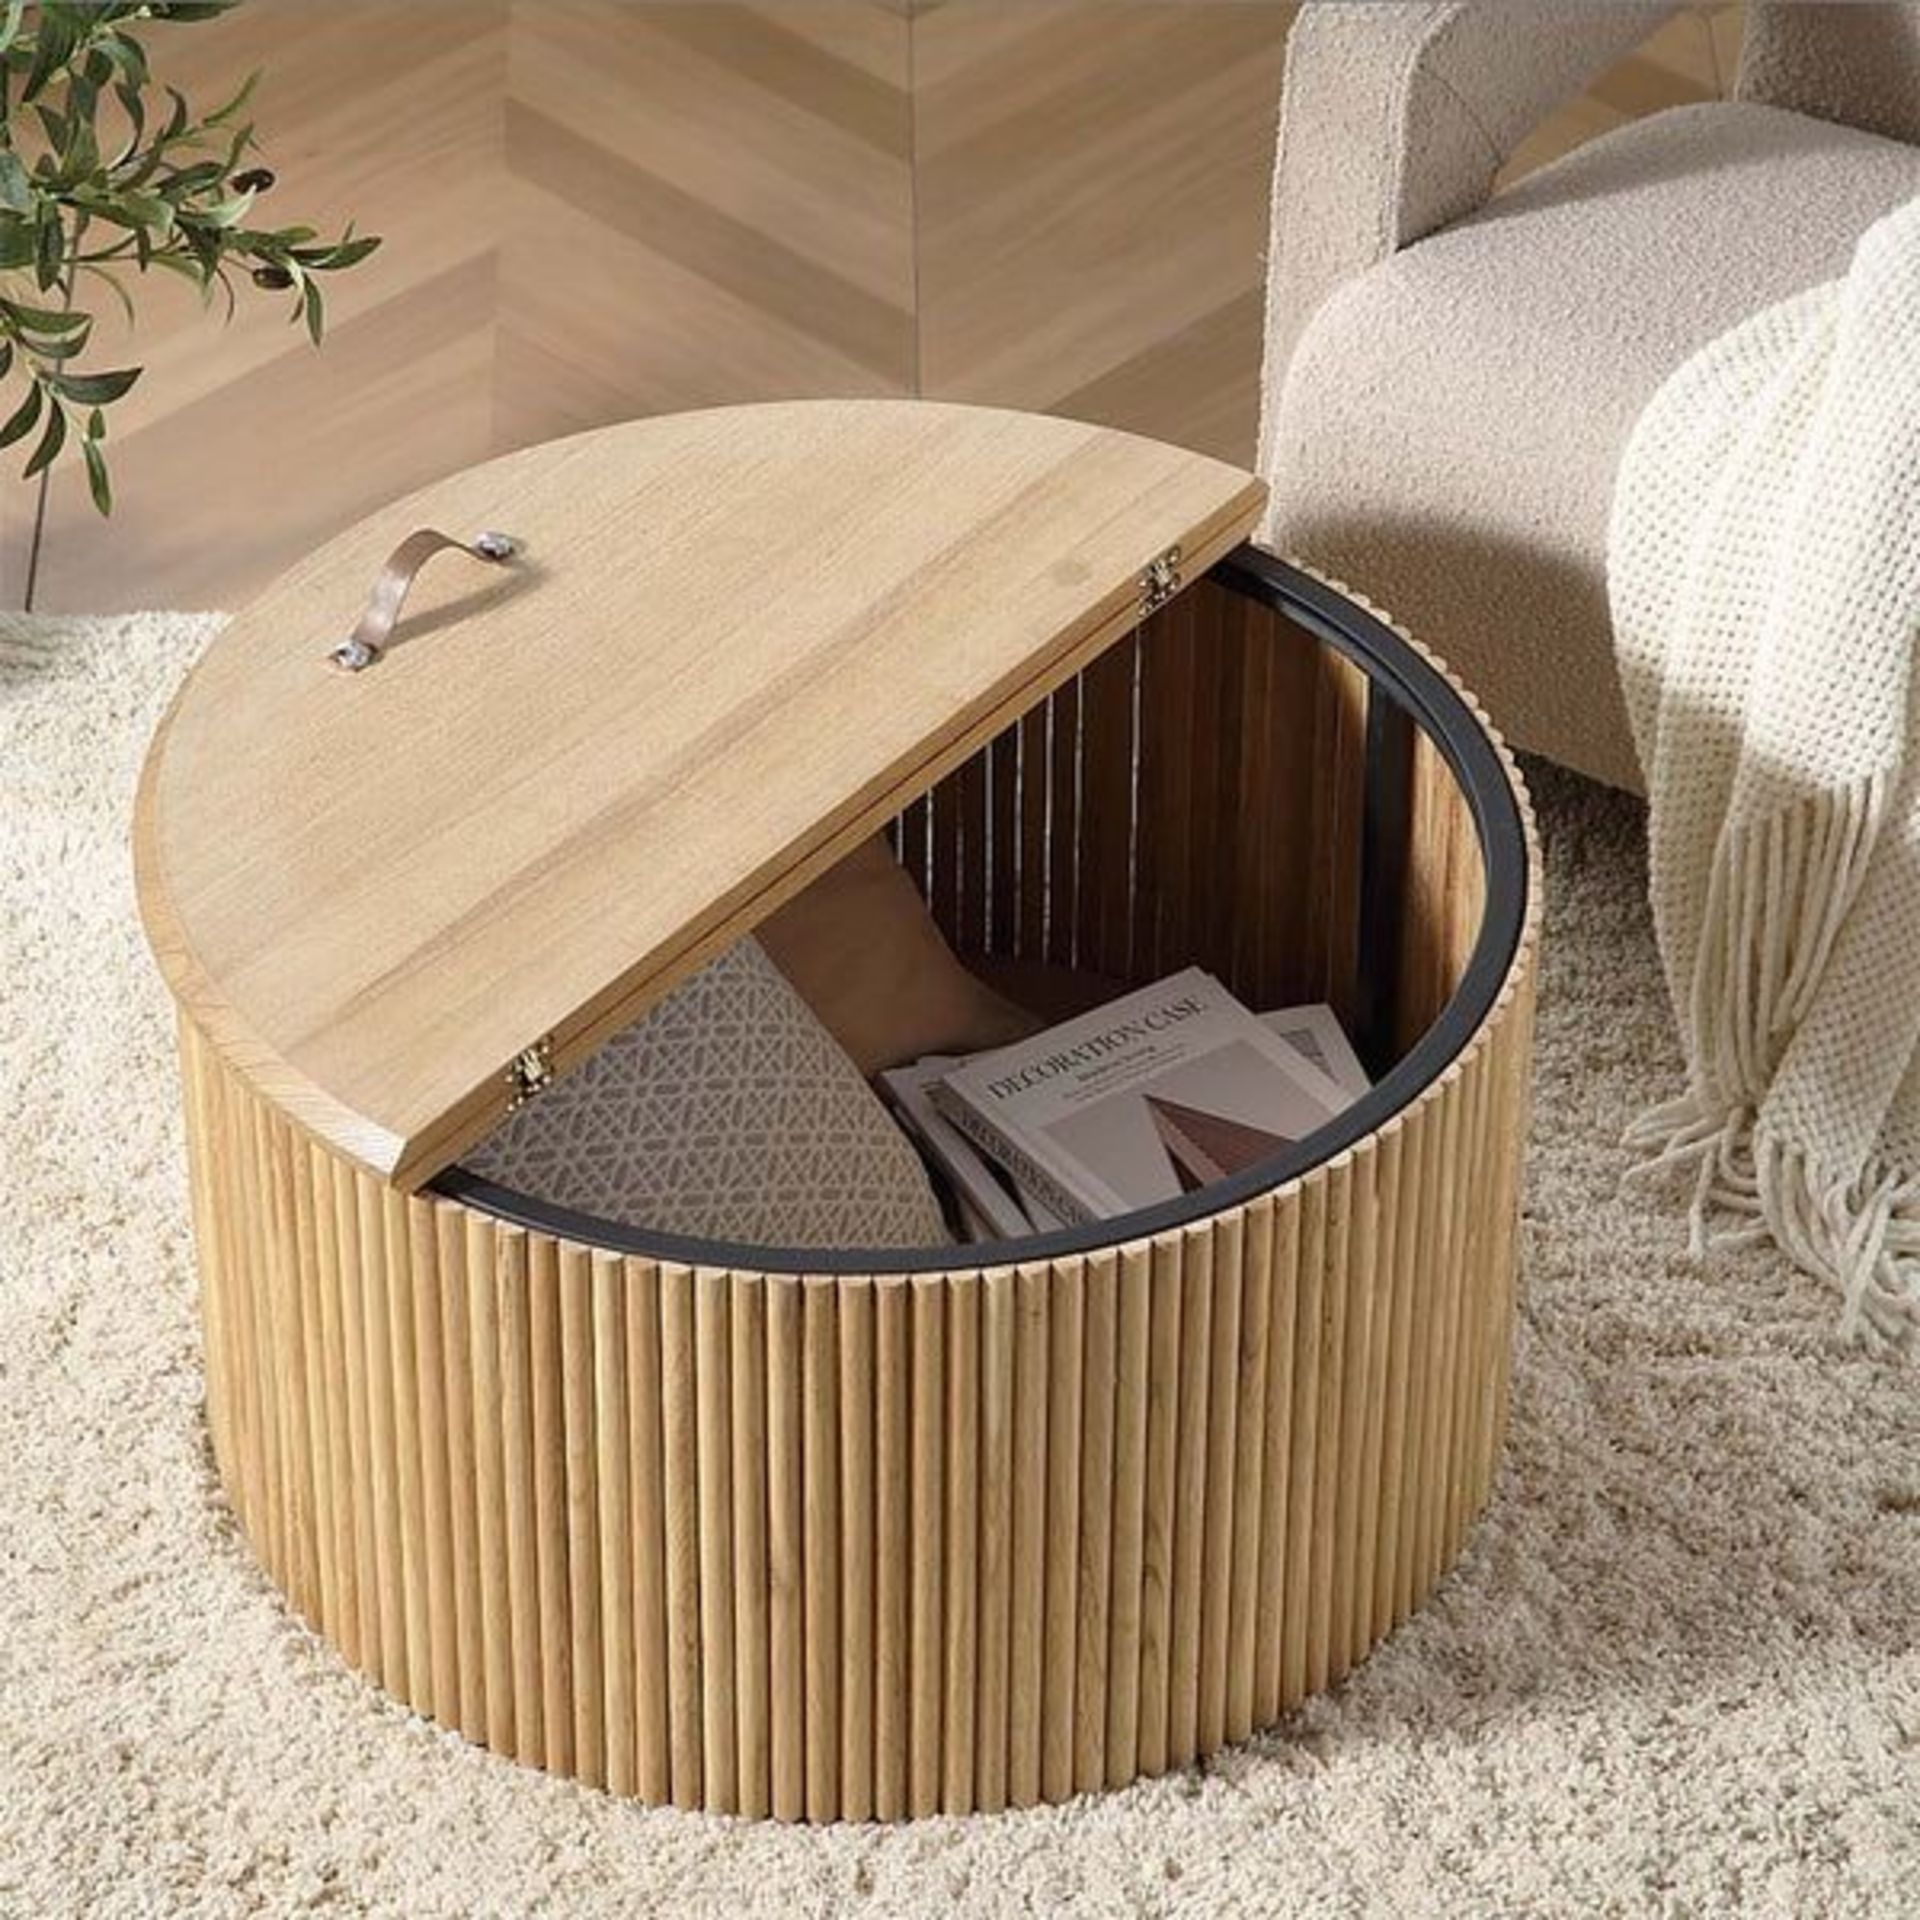 Maru Oak Round Coffee Table with Storage, Oak. - ER31. RRP £349.99. Featuring fluted base made - Image 2 of 2